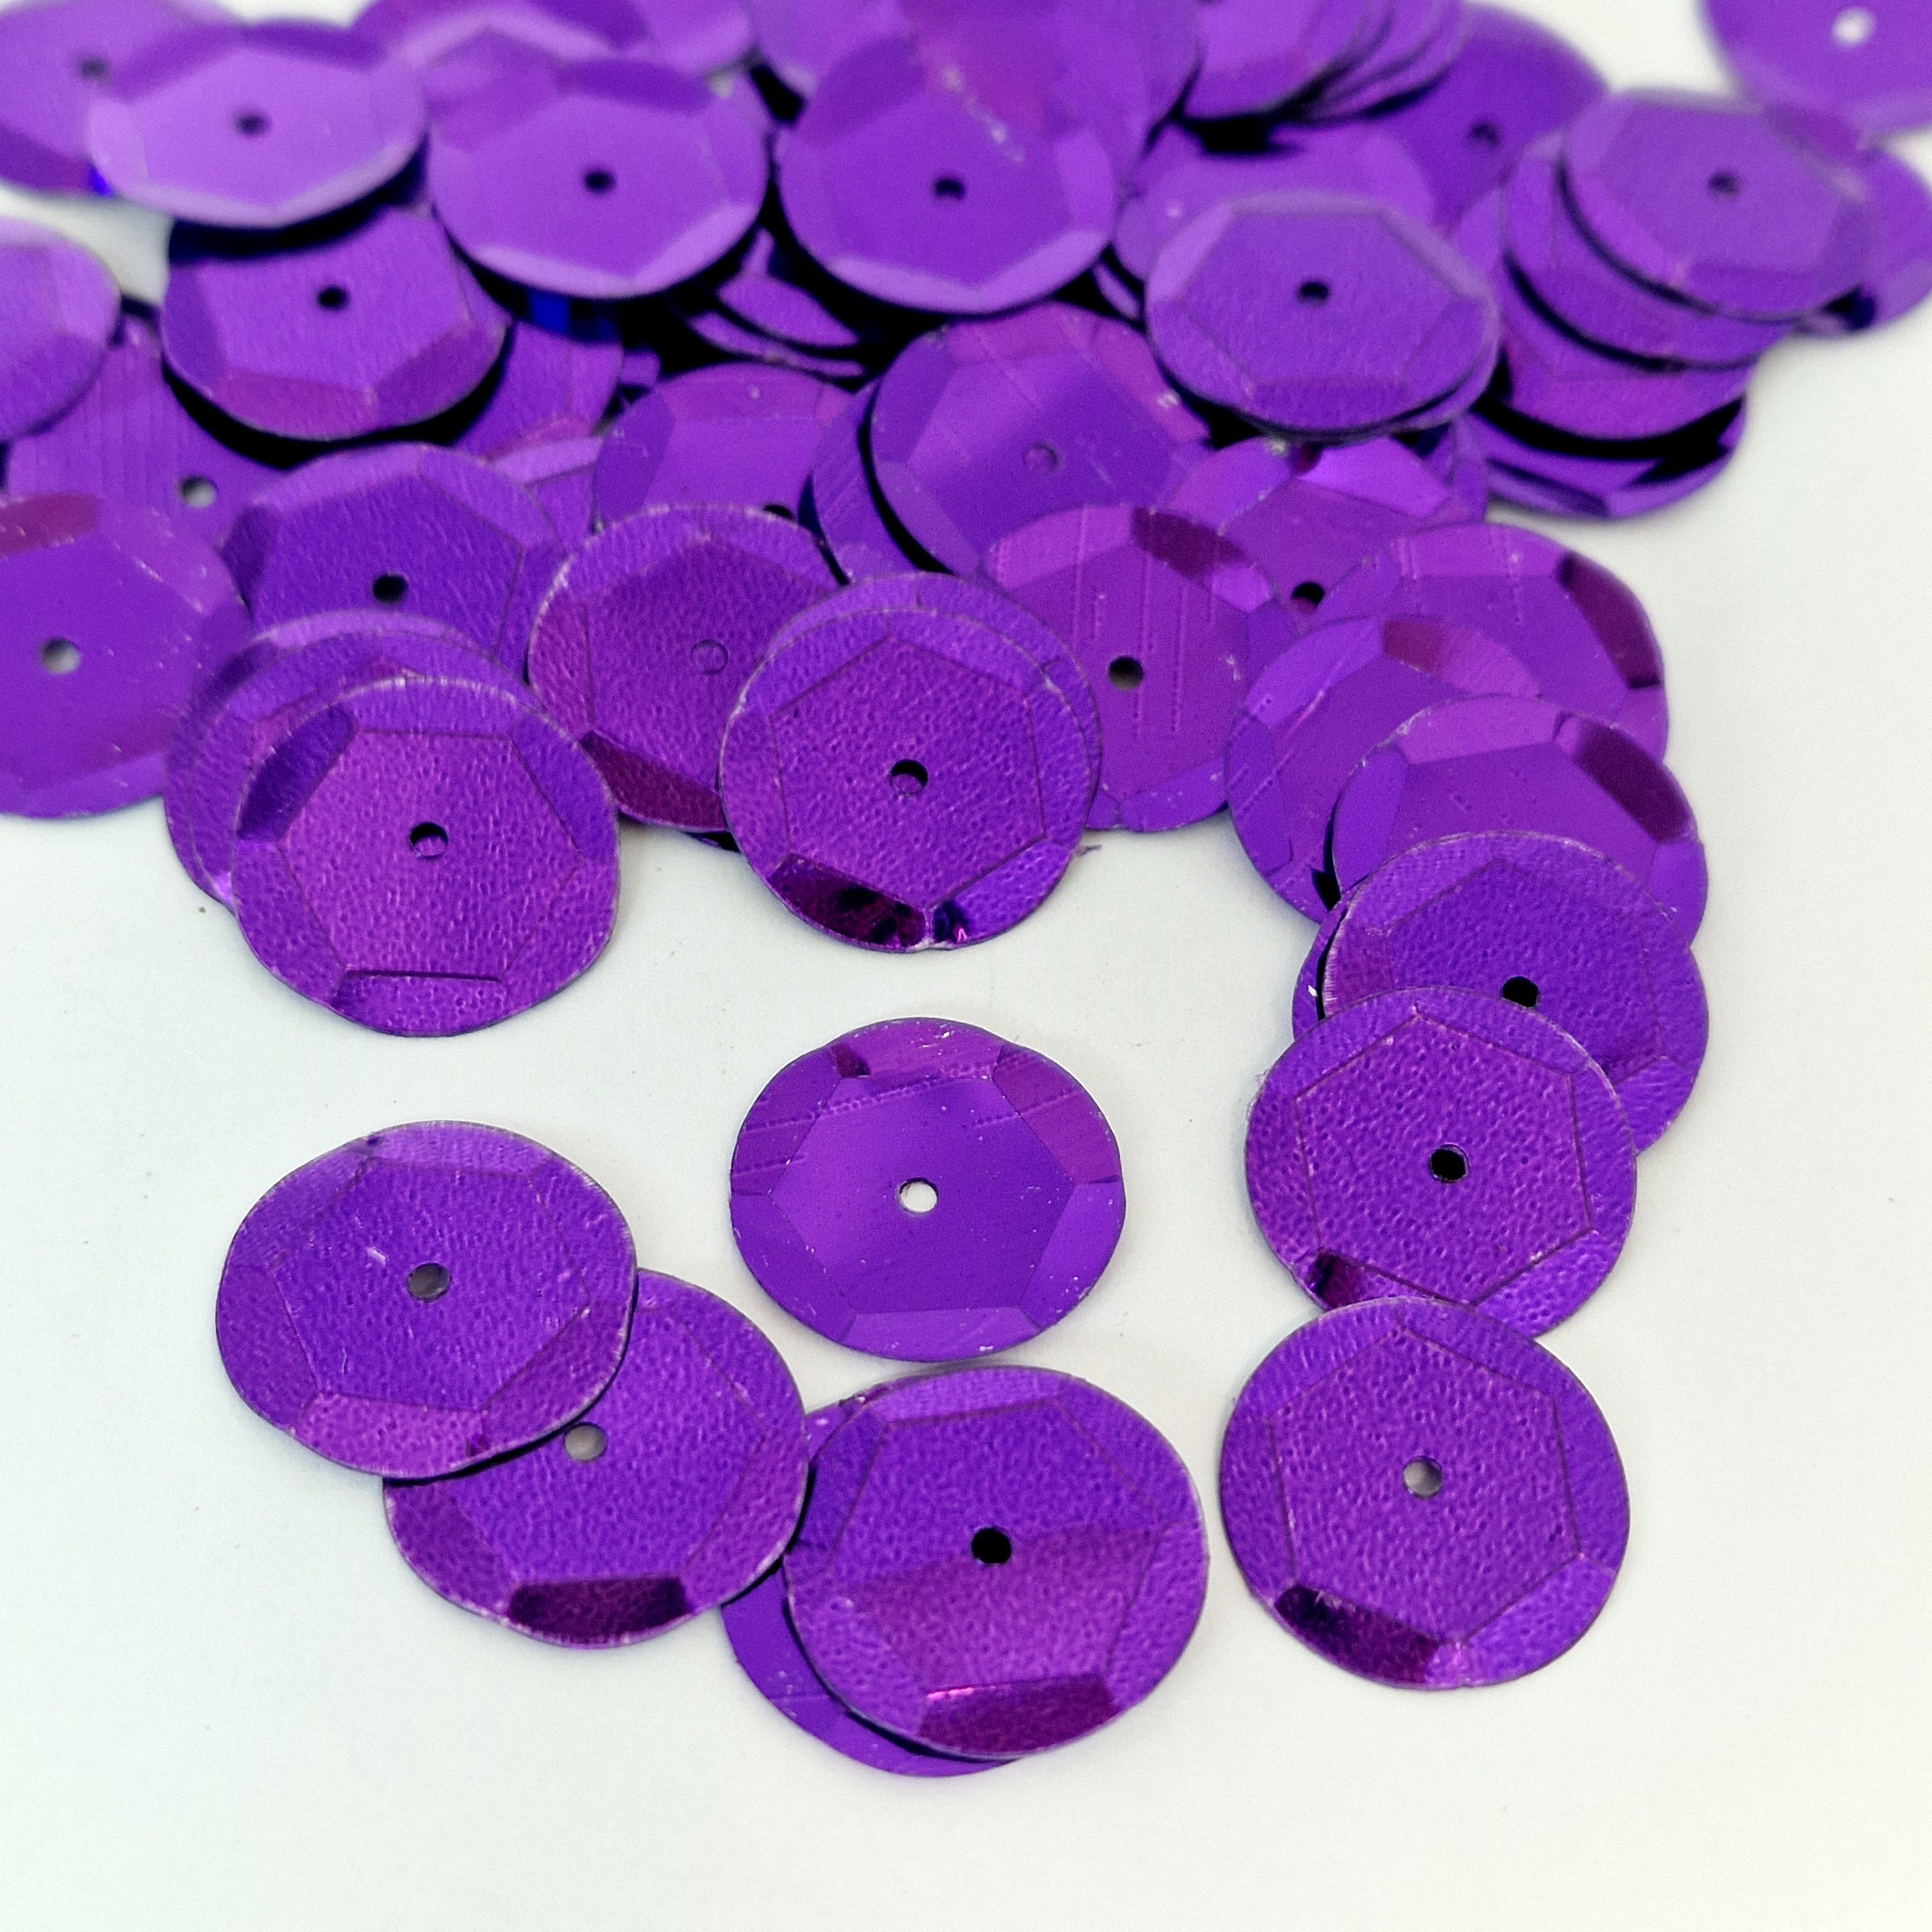 MajorCrafts 40grams 12mm Royal Purple Round Sew-On Cup Sequins Q12